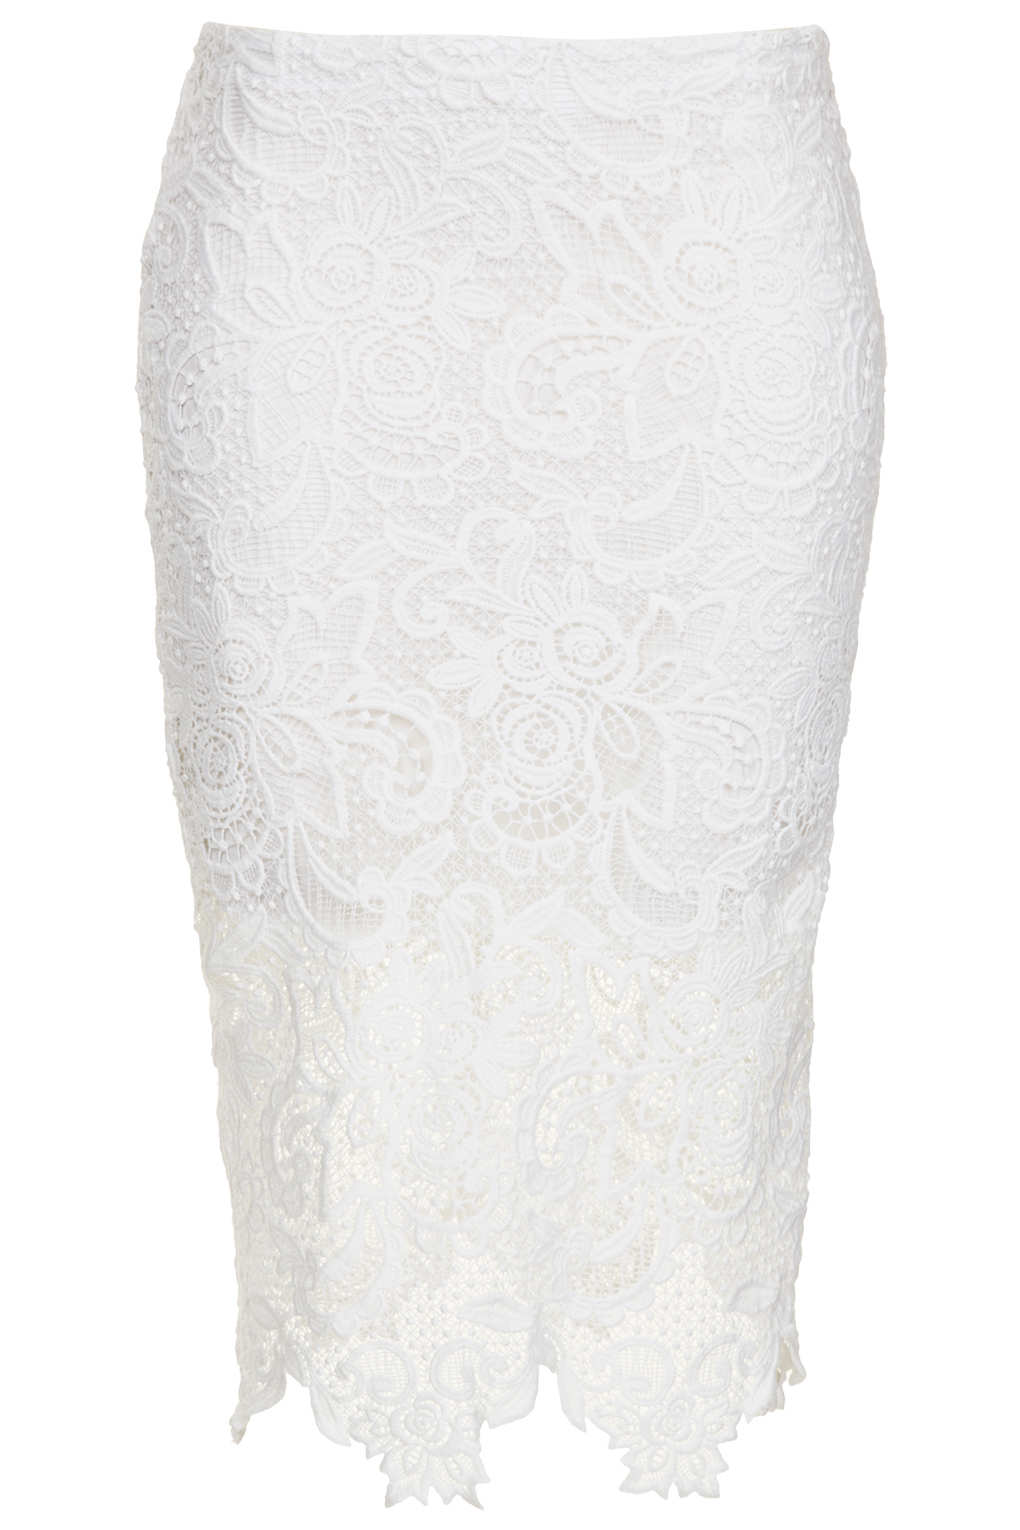 Lyst - Topshop White Lace Pencil Skirt in White